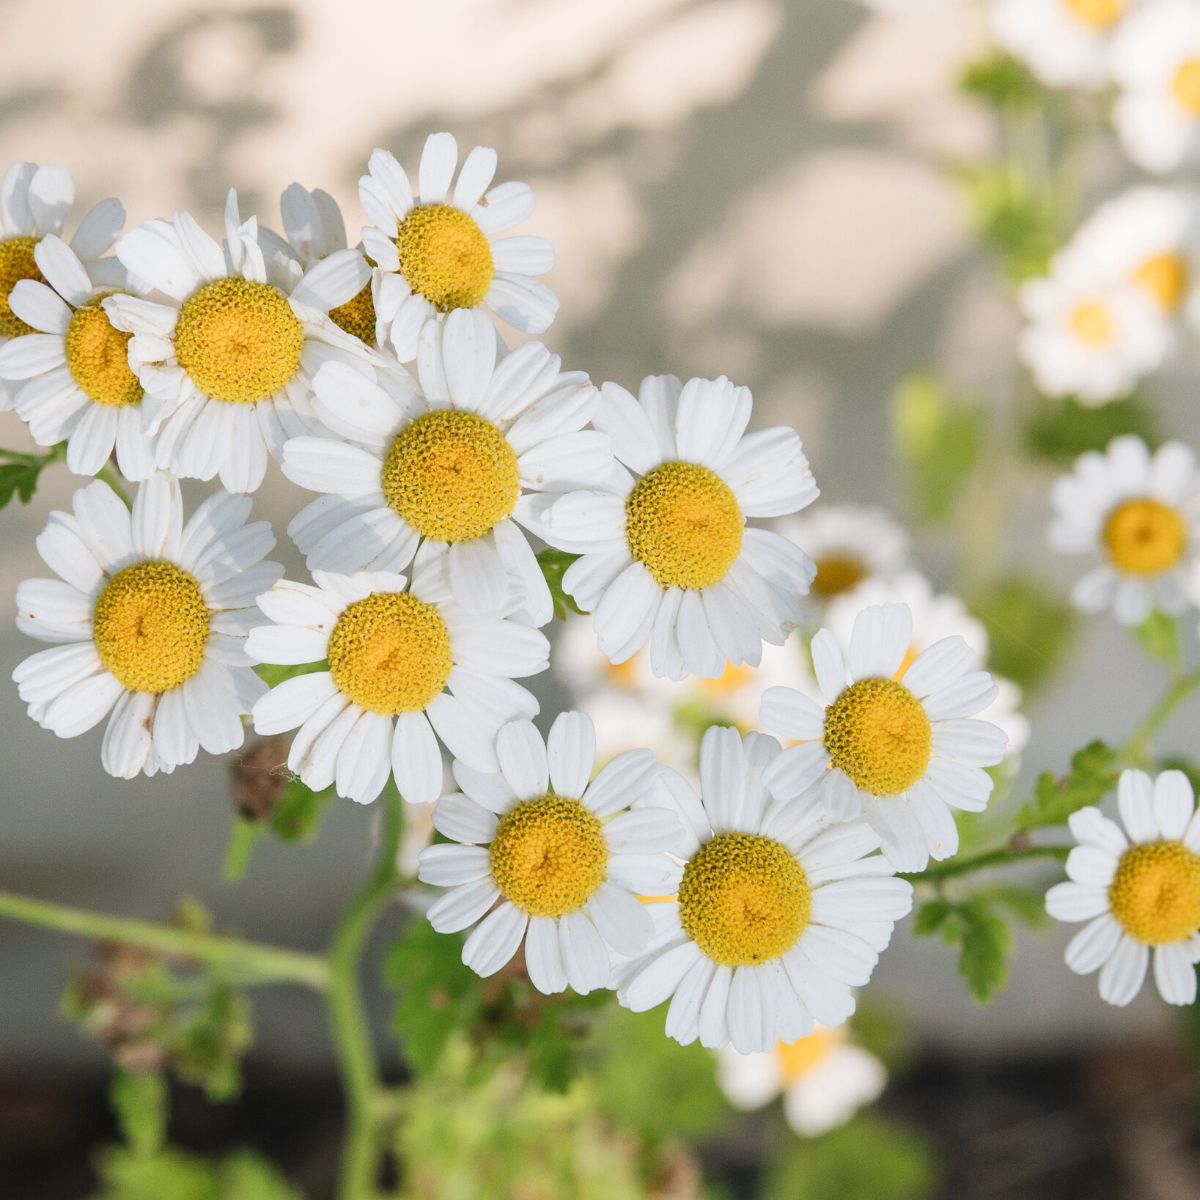 Chamomile one of the most popular medicinal plants in the world on Thursd